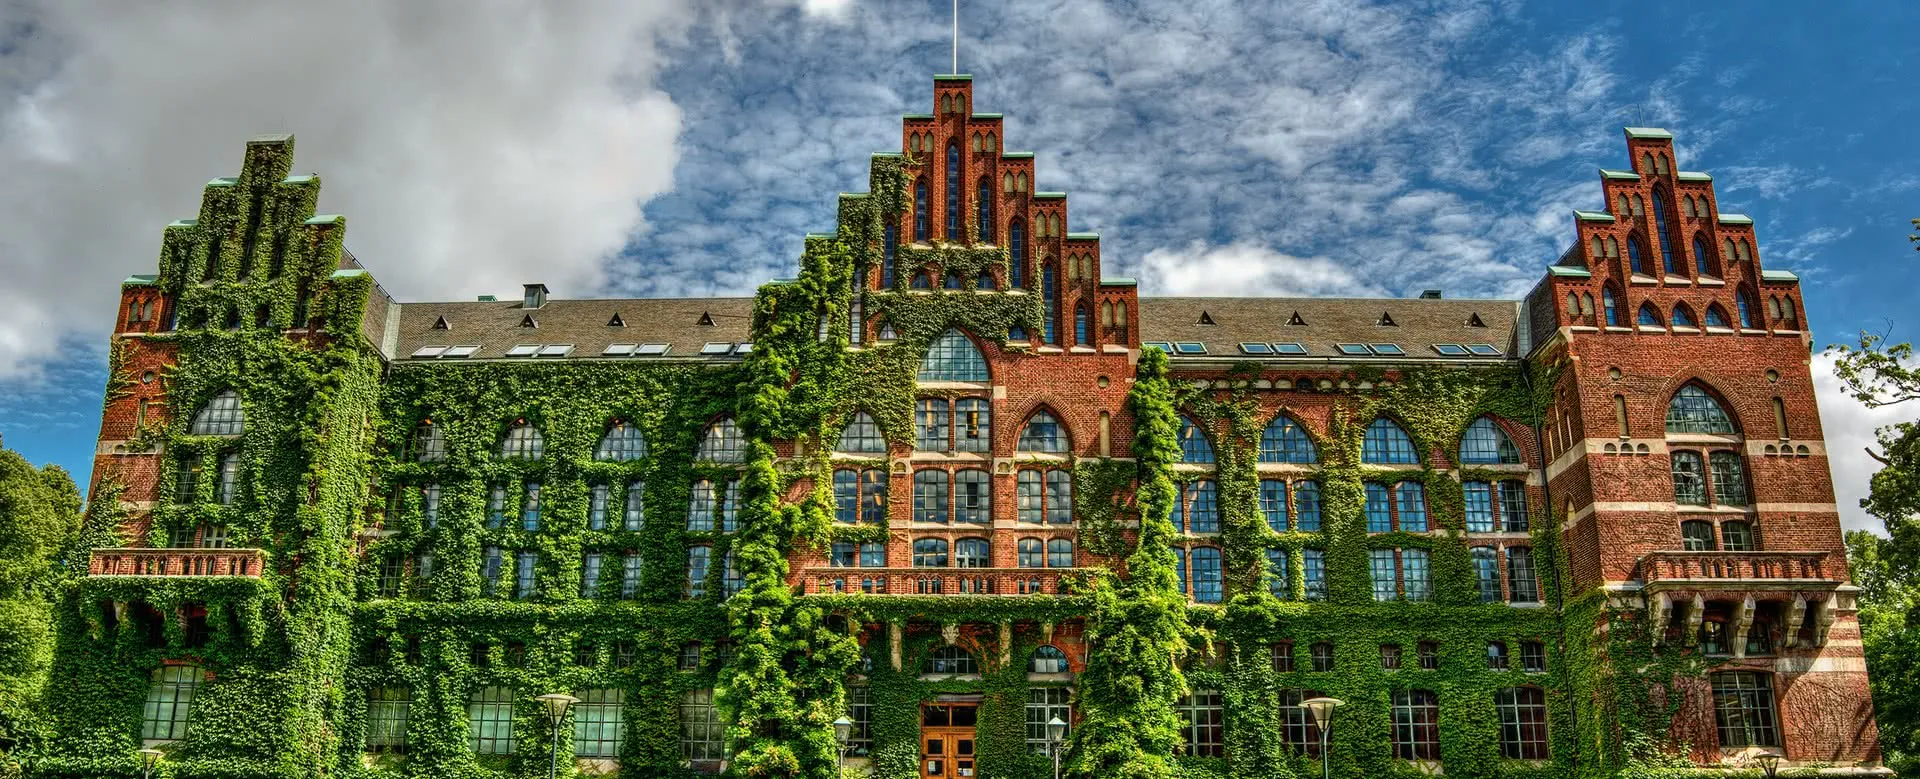 Lund - the destination with youth hostels